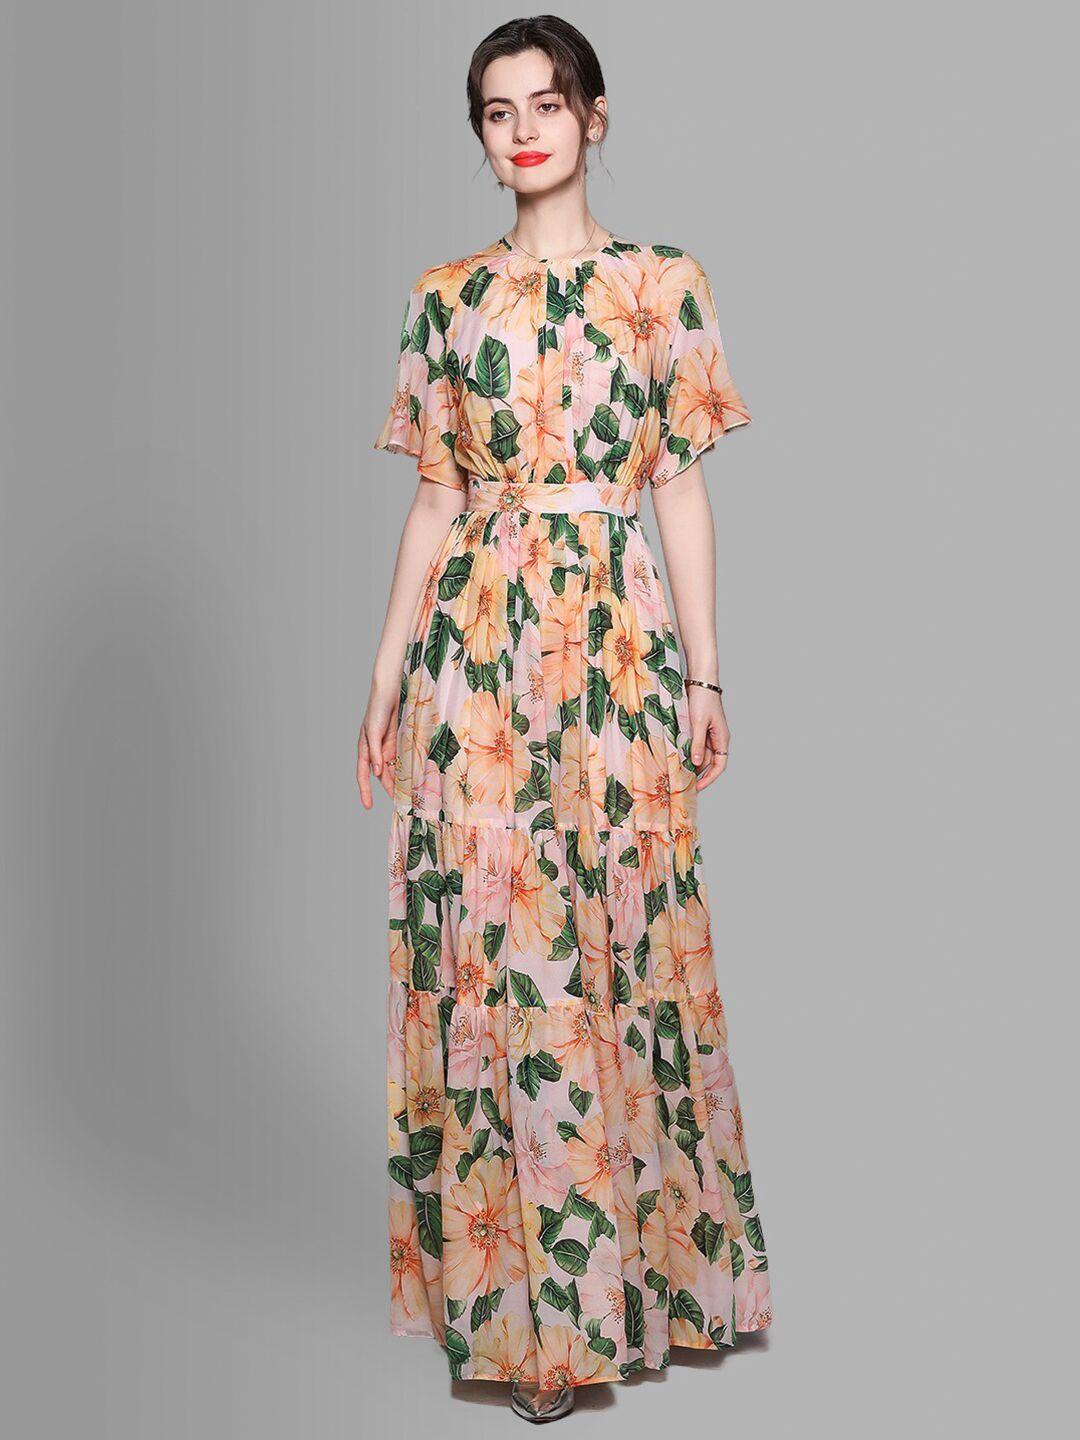 jc collection yellow & multicoloured floral maxi dress